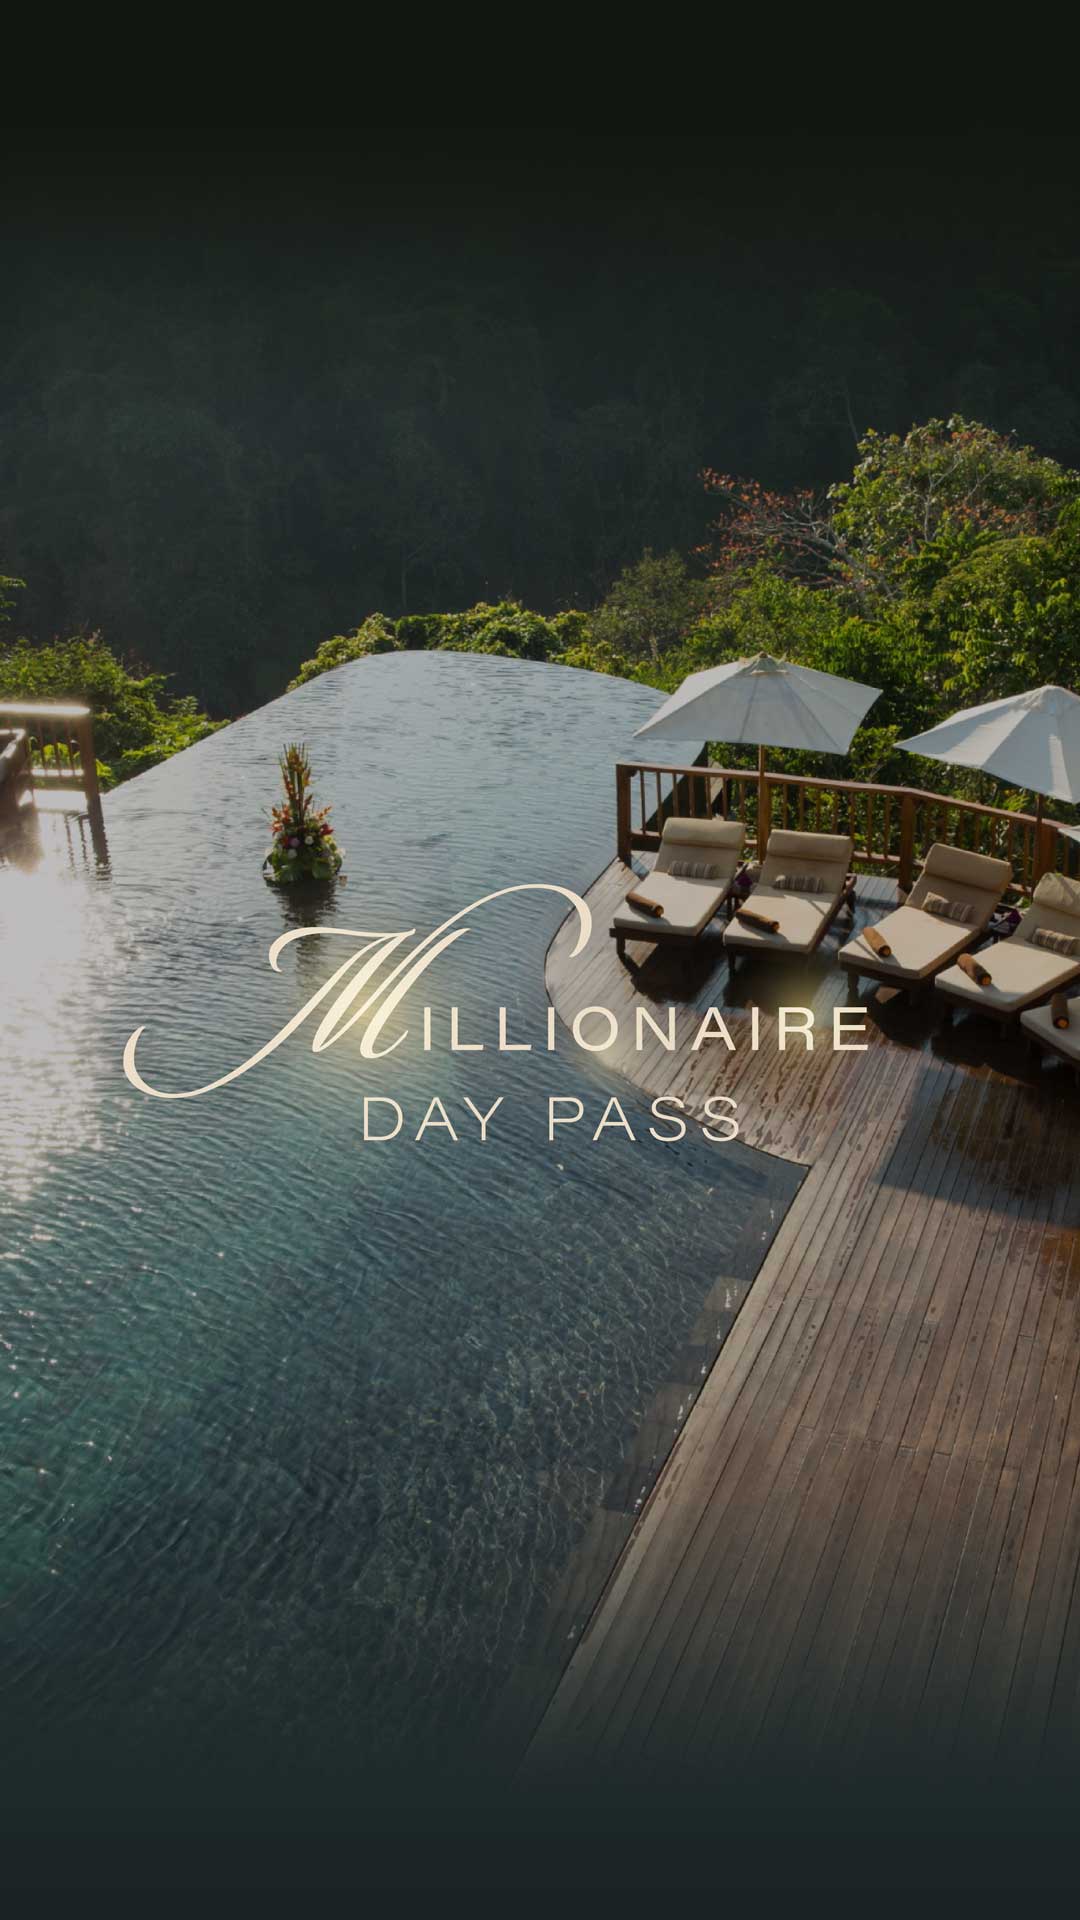 Bali All Inclusive Resort - The Ultimate Day Pass